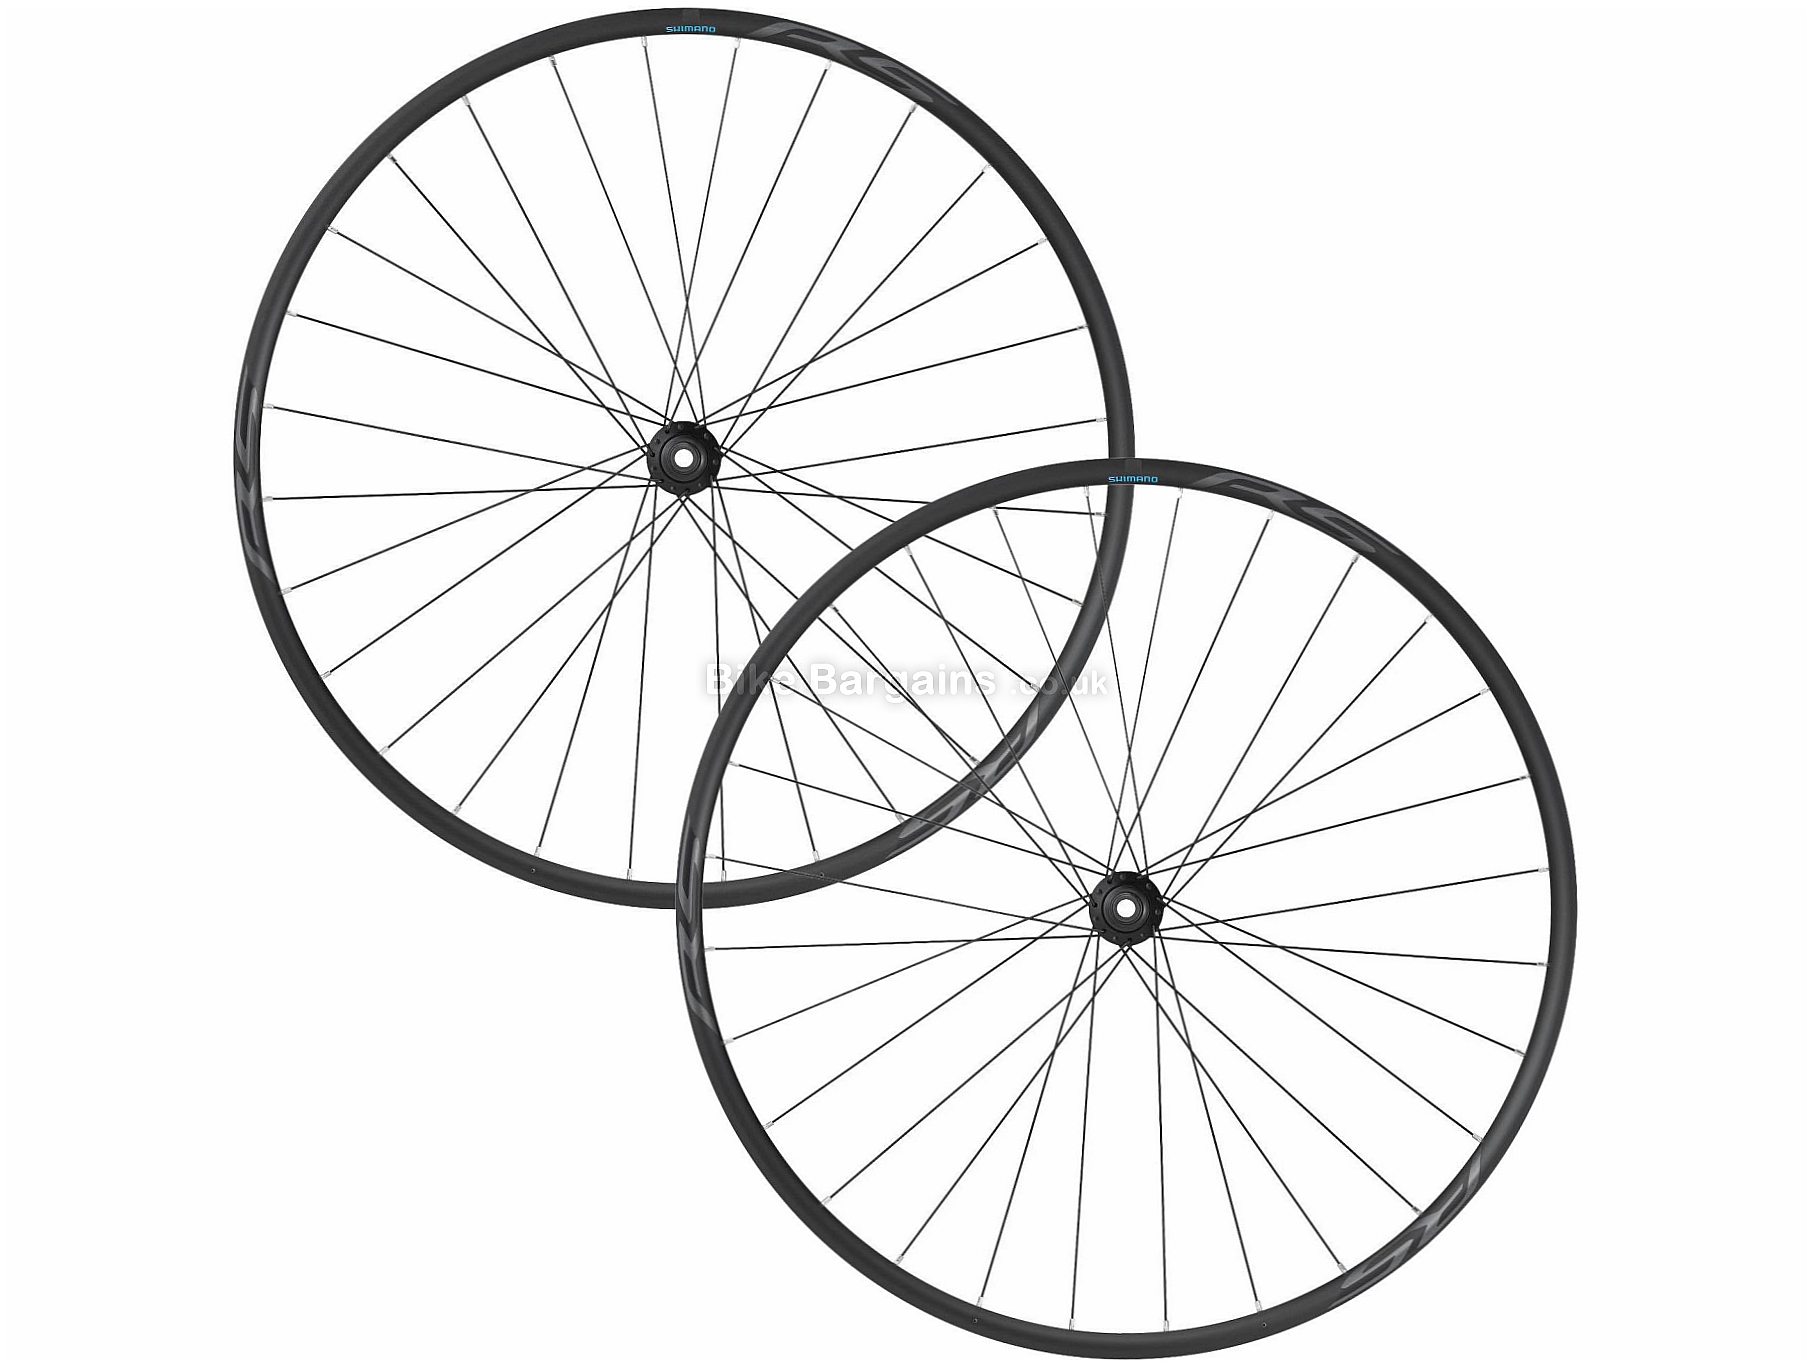 Shimano RS171 Disc Road Wheels (Expired) was £128